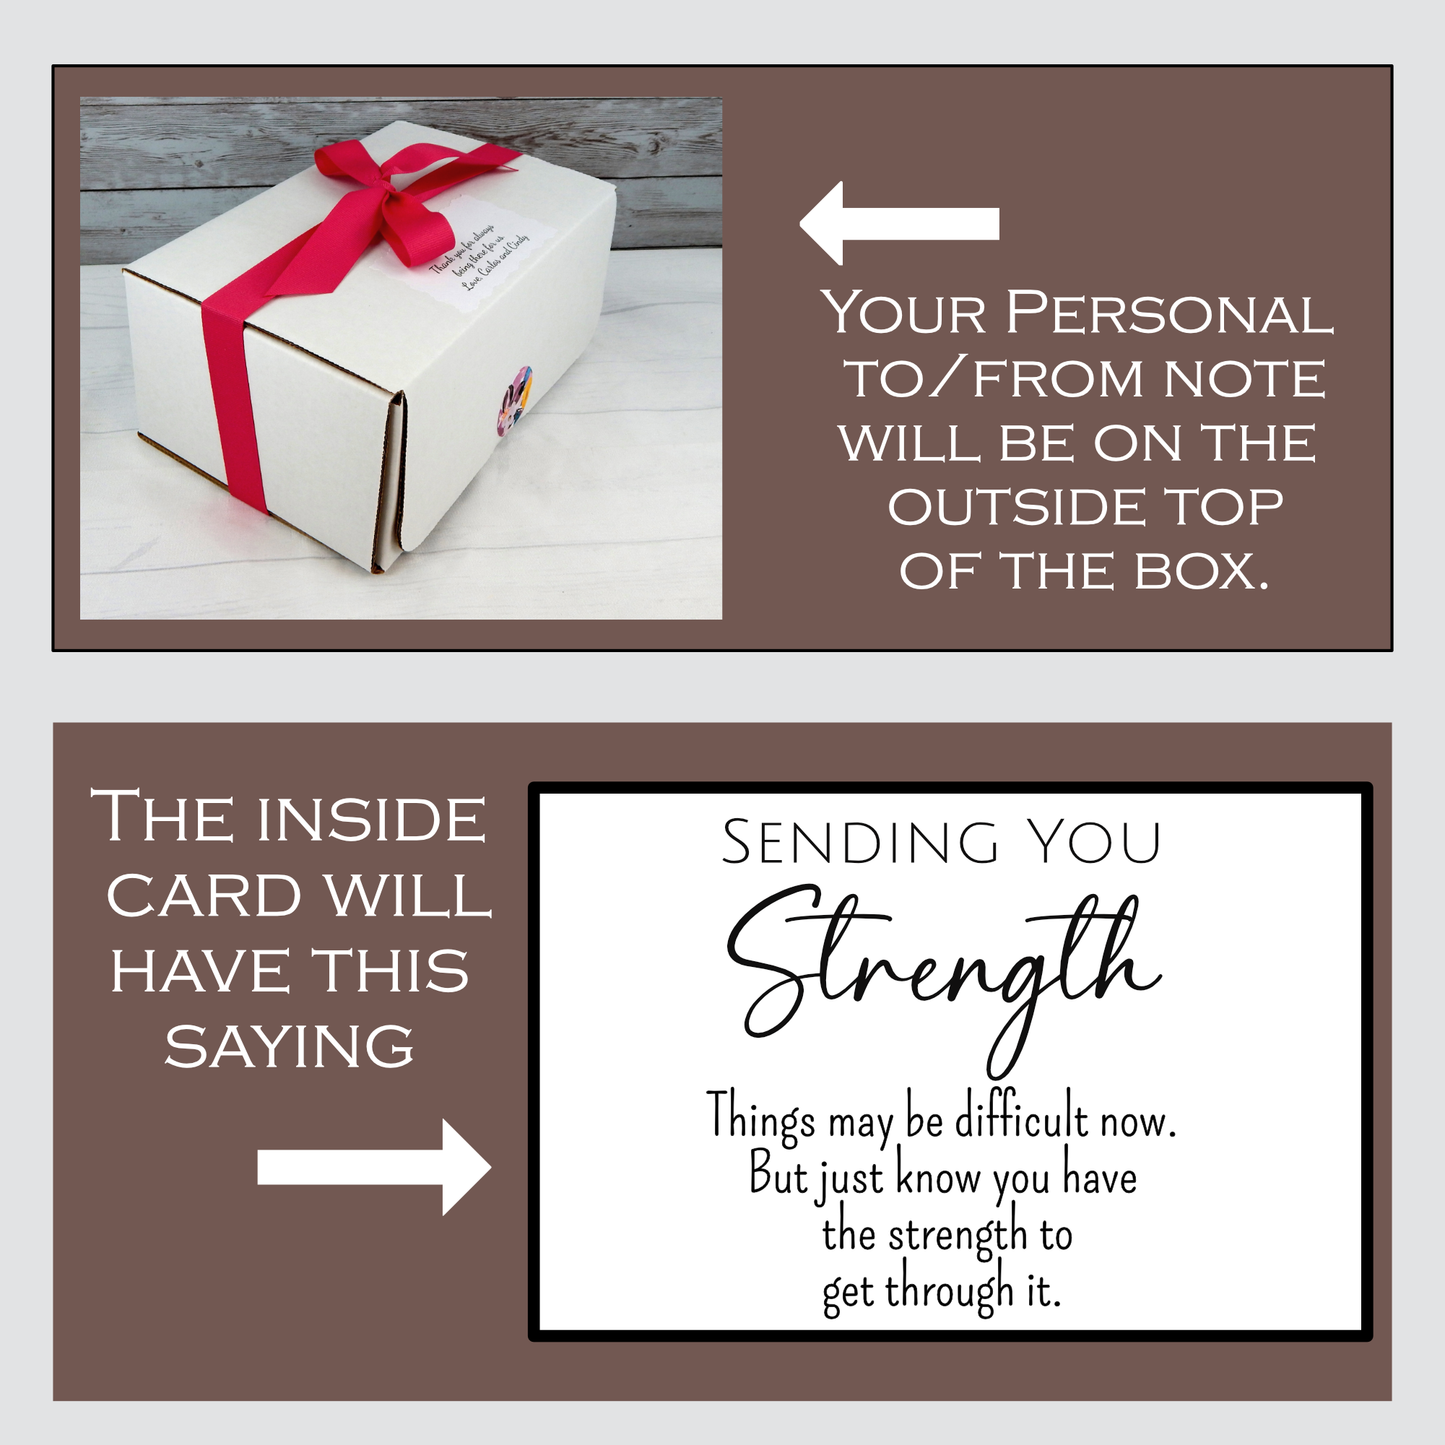 Strength Gift Basket with Personalized Coffee Mug